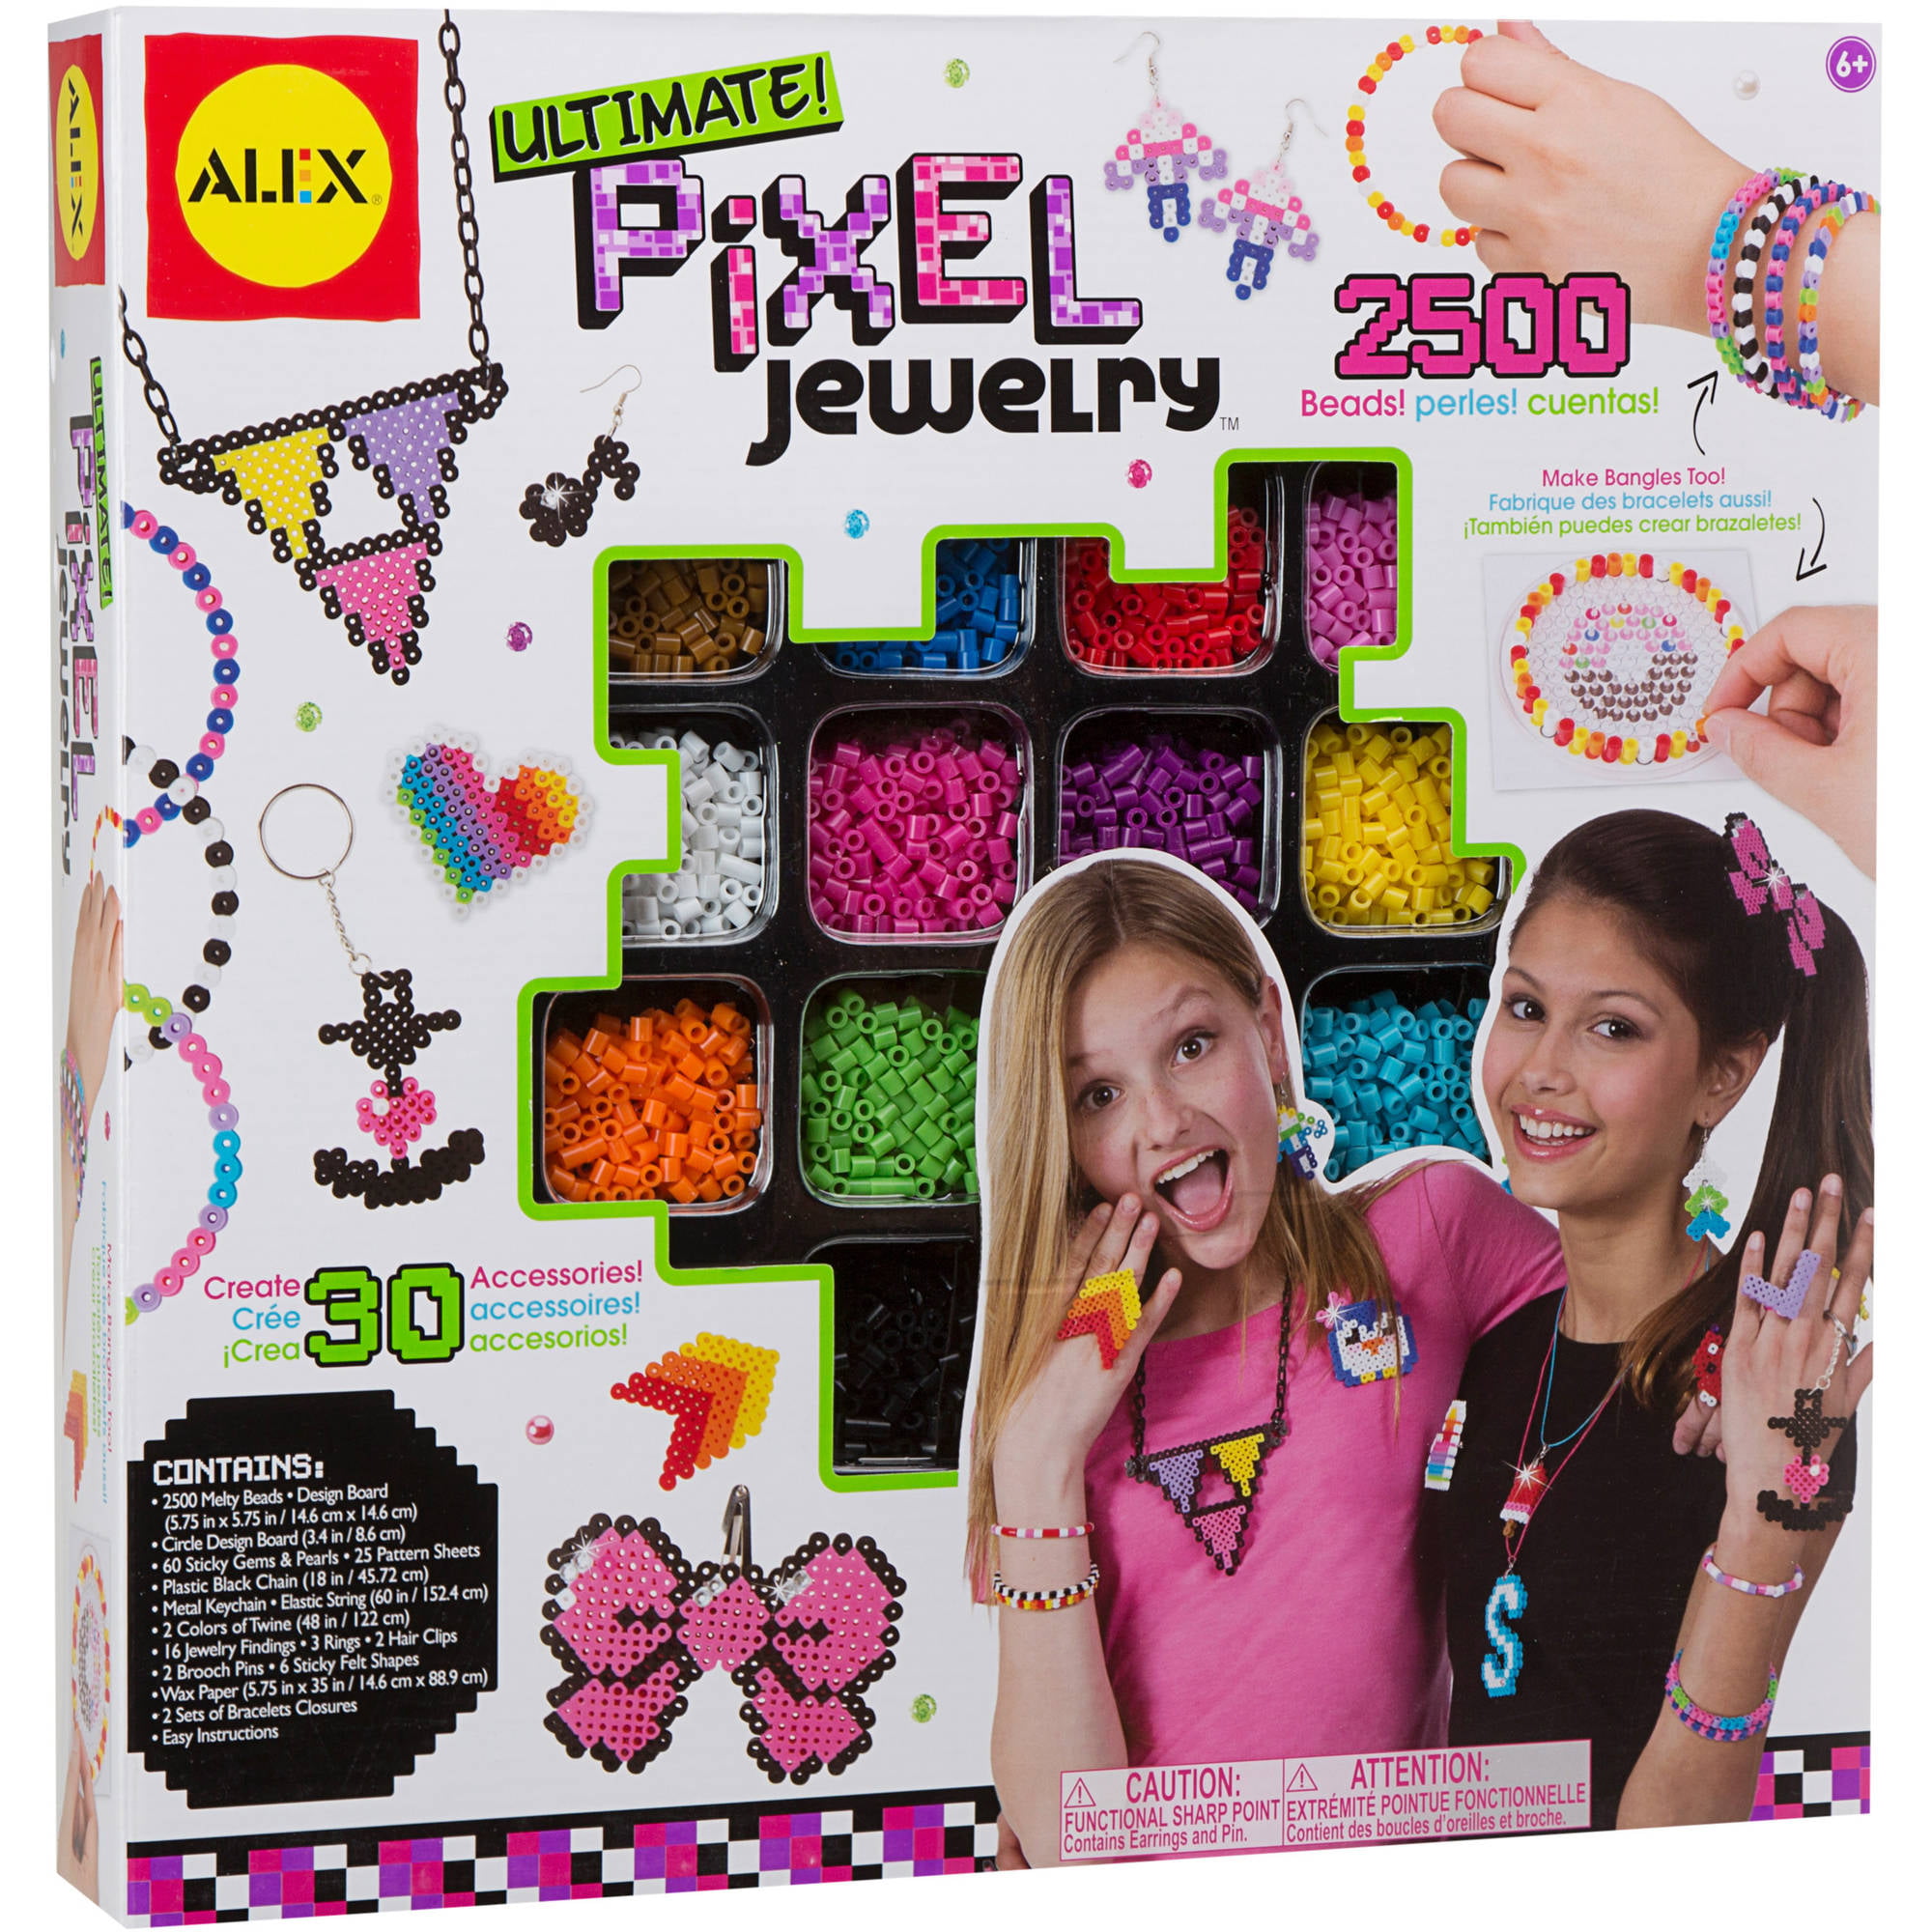 Tic Tac Toy - We found this fun Pixel Art Kit at Learning